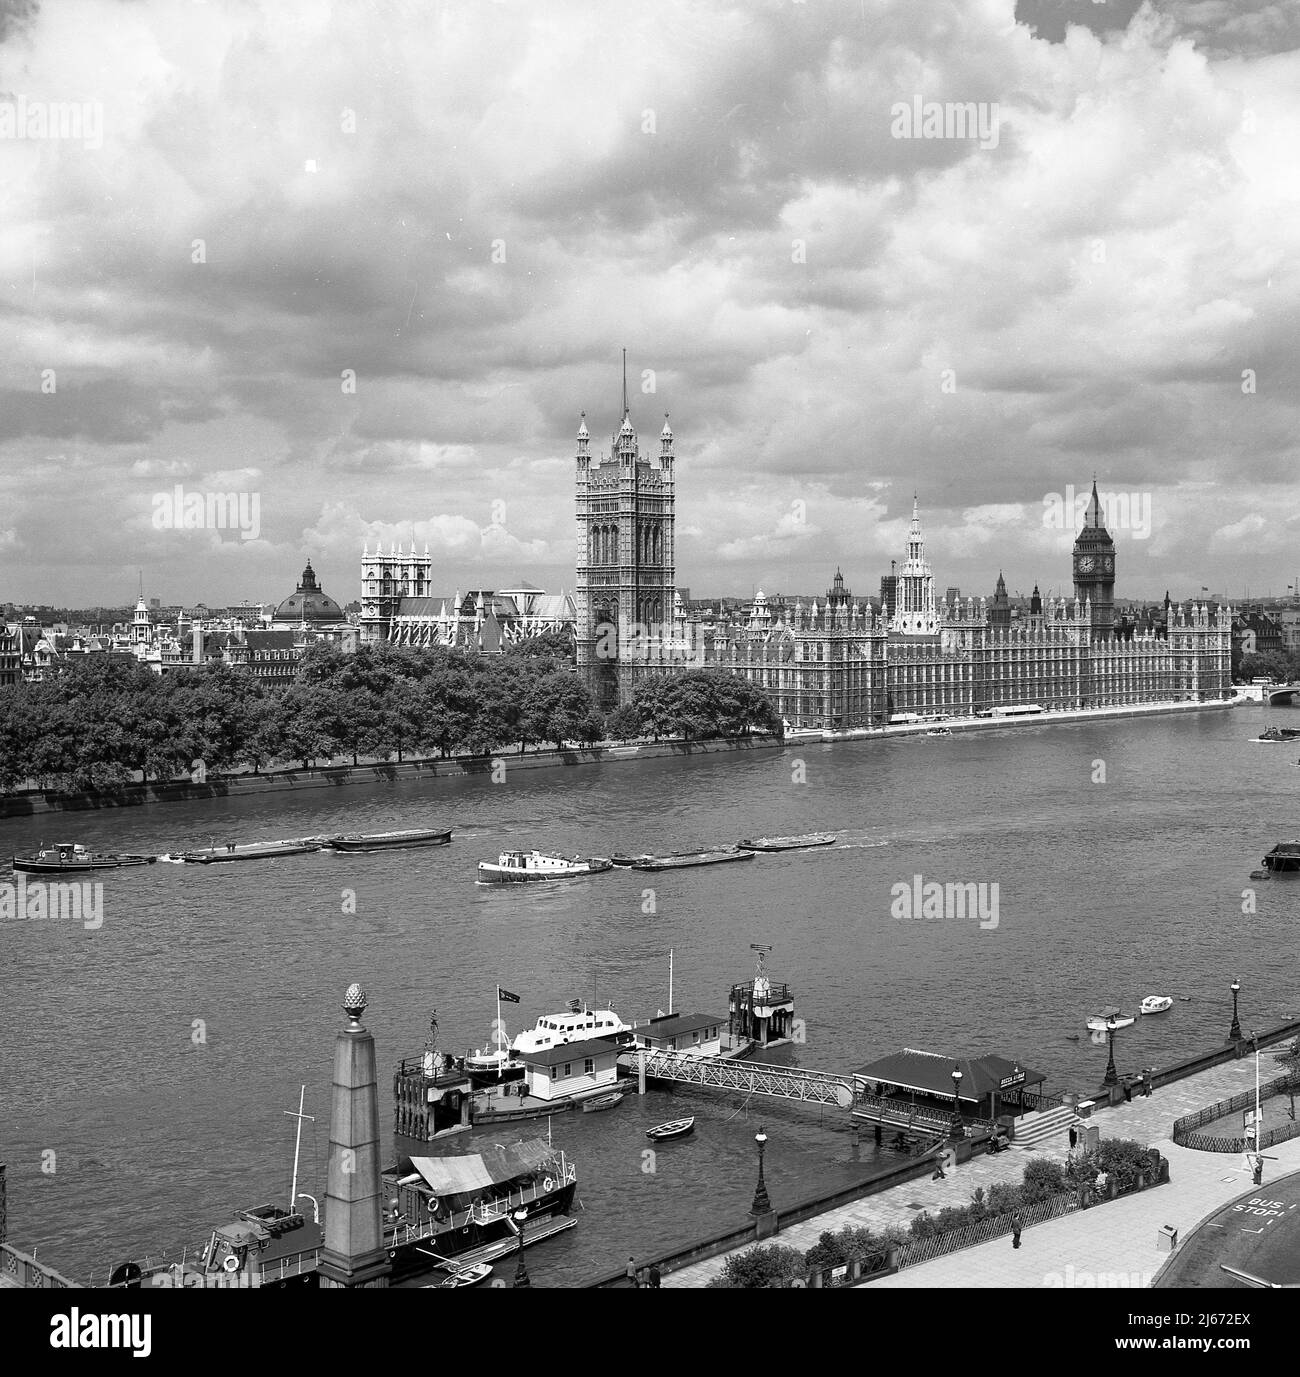 1960s, historical, view from the south bank across the river Thames to the buildings of the Palace of Westminster, home of the two UK Houses of Parliament, the House of Commons and House of Lords. The tallest of the buildings is the Vctoria Tower, the other is the far distance is the Clock Tower, commonly known as Big Ben. Stock Photo